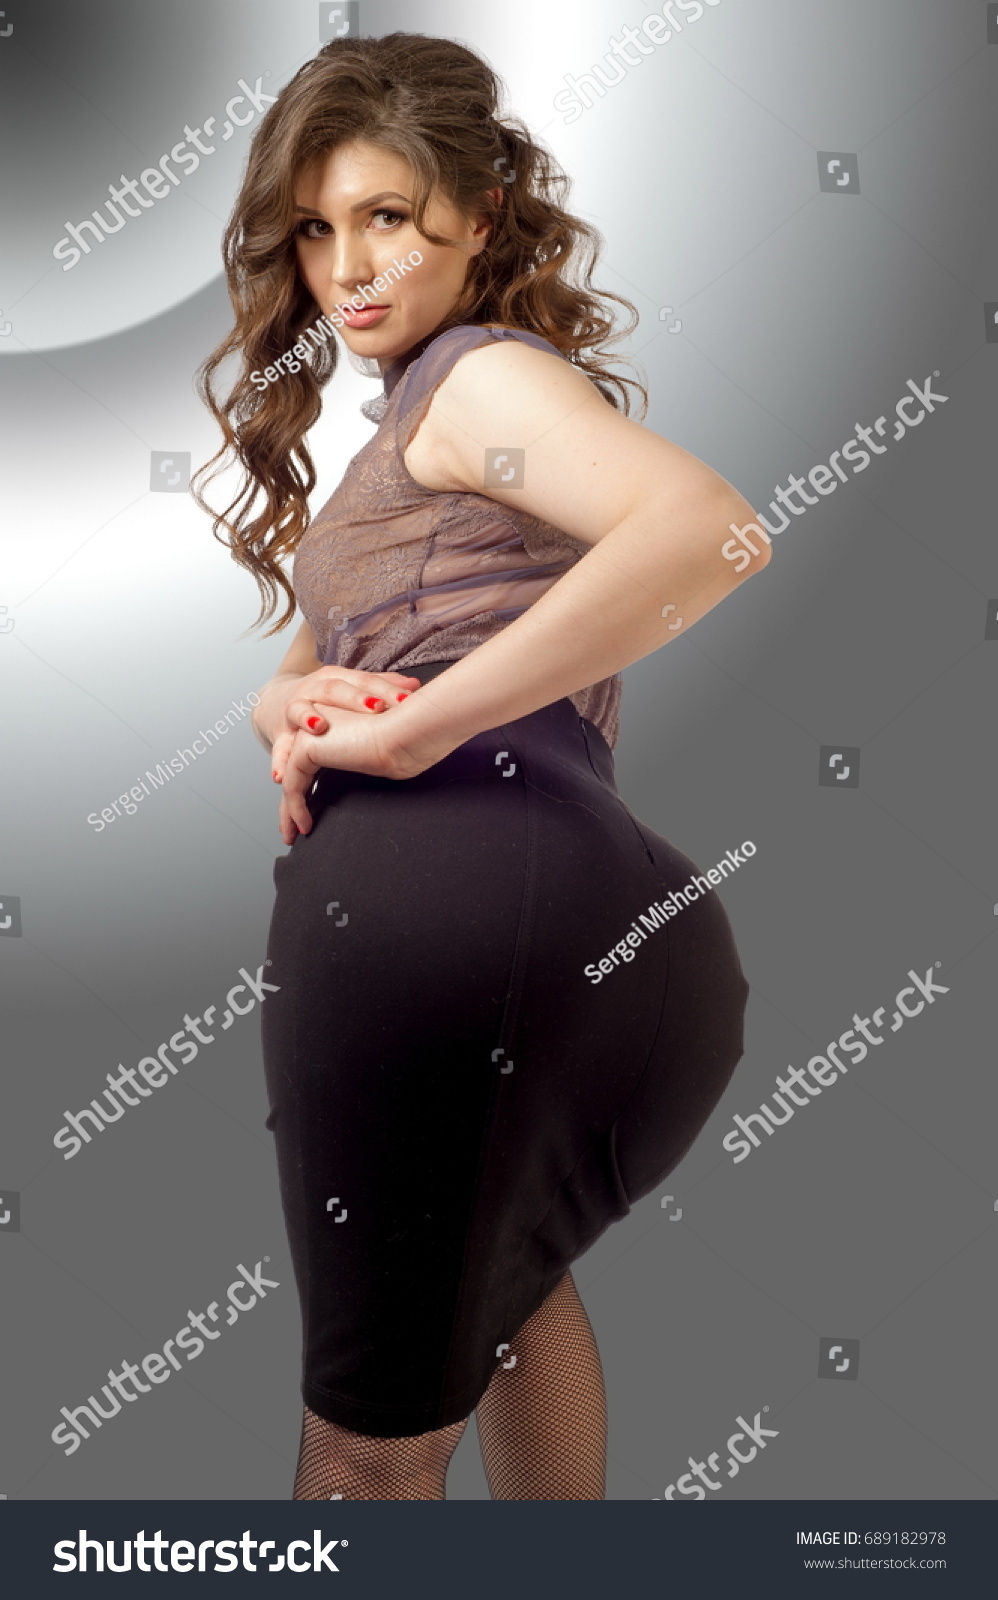 Girls with big ass images Very Beautiful Girl Desirable Woman Brown Stock Photo Edit Now 689182978